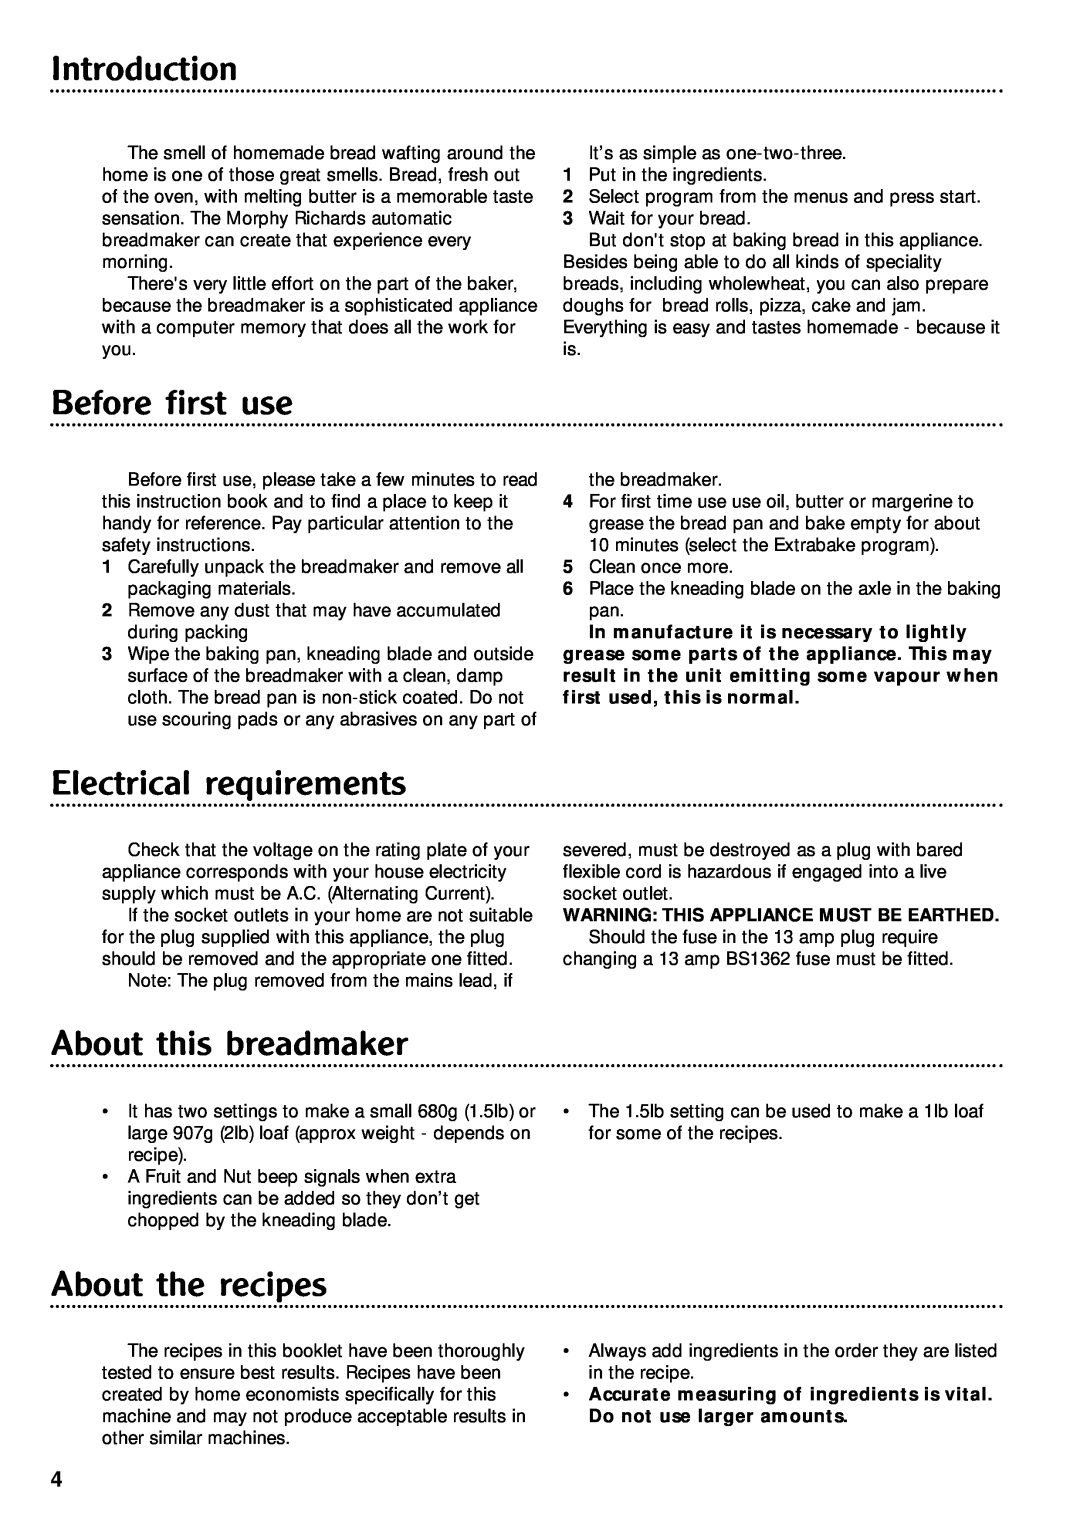 Morphy Richards Fastbake breadmaker manual Introduction, Before first use, Electrical requirements, About this breadmaker 